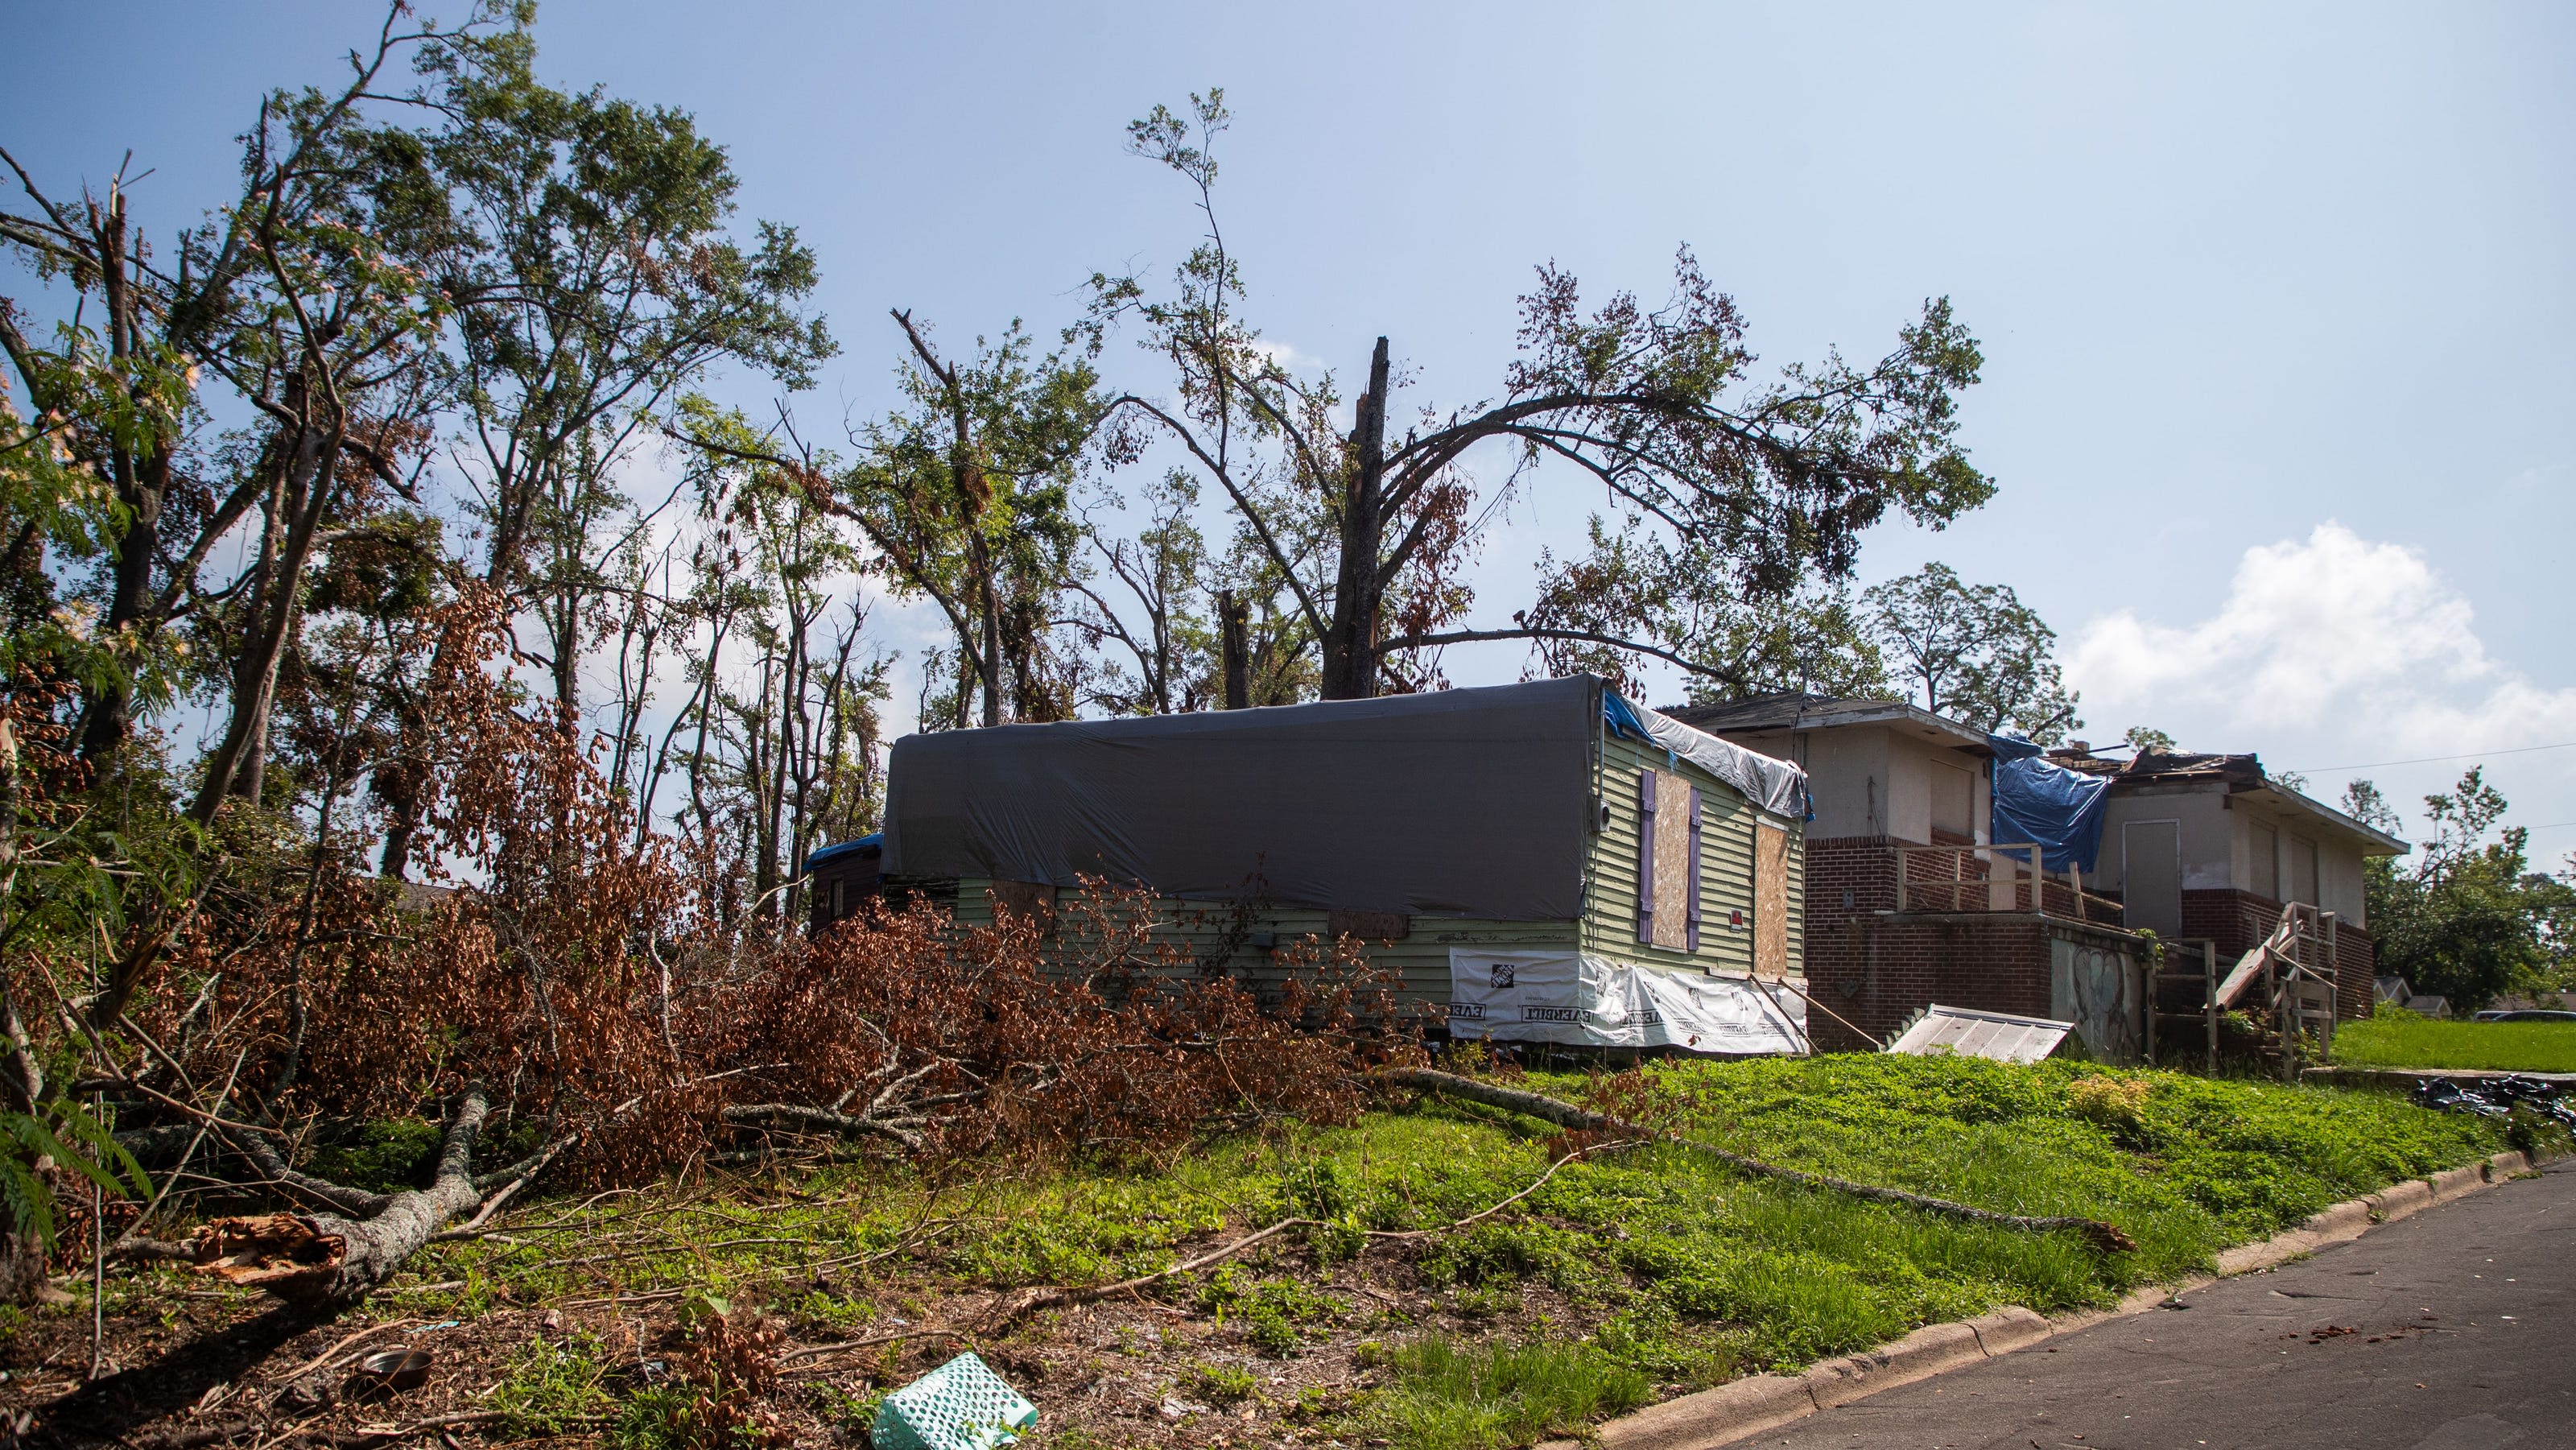 Supporting Tallahassee through storm recovery: A call for mental wellness